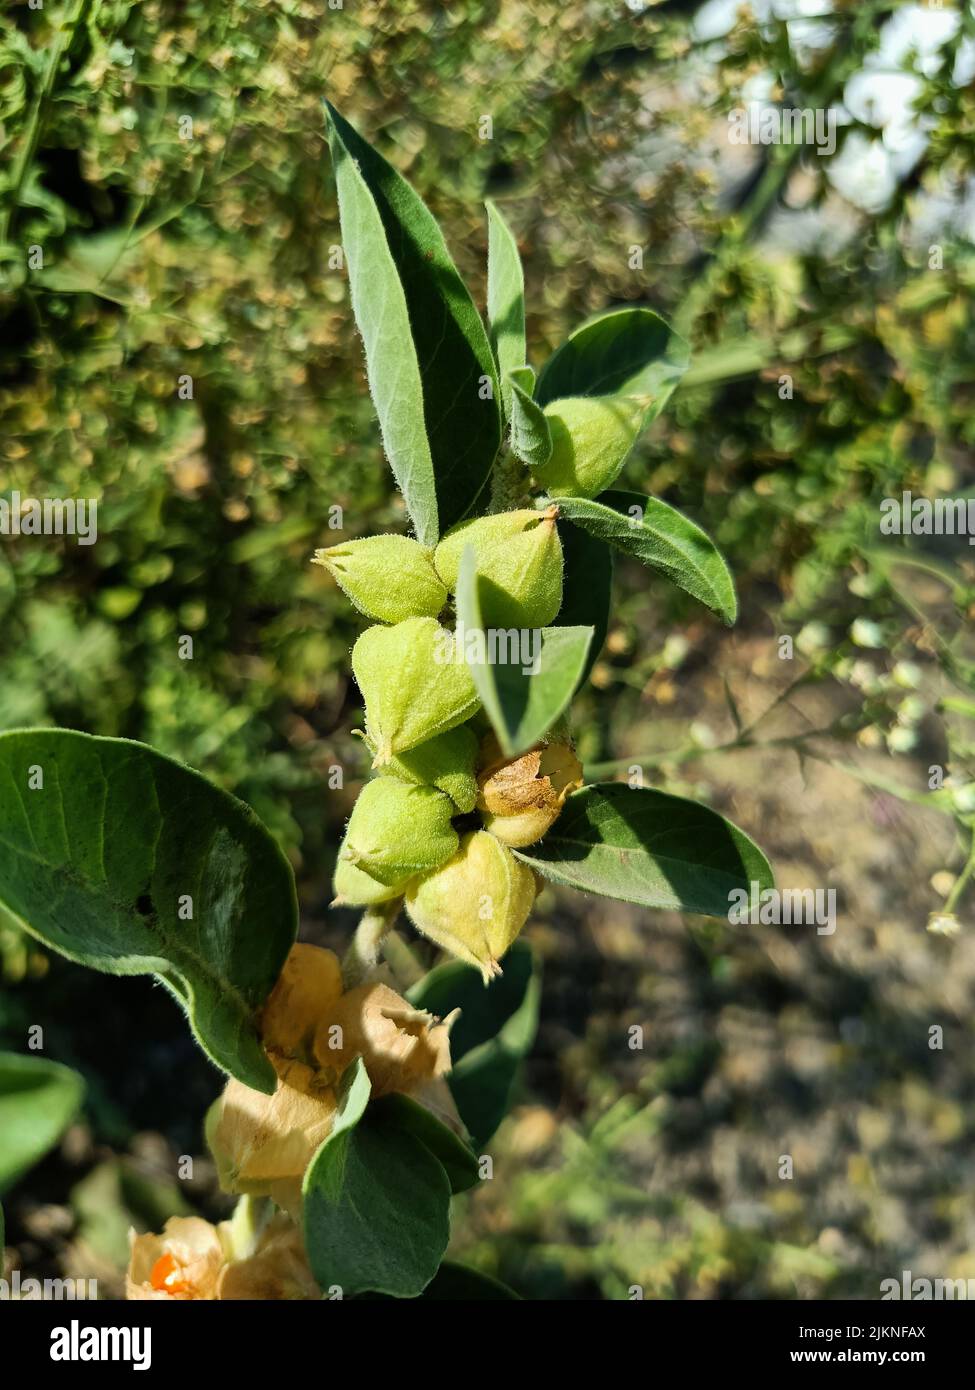 Ashwagandha medicinal plant used in ayurvedic medicines this plant also known as withania somnifera or winter cherry or indian ginseng plant u Stock Photo